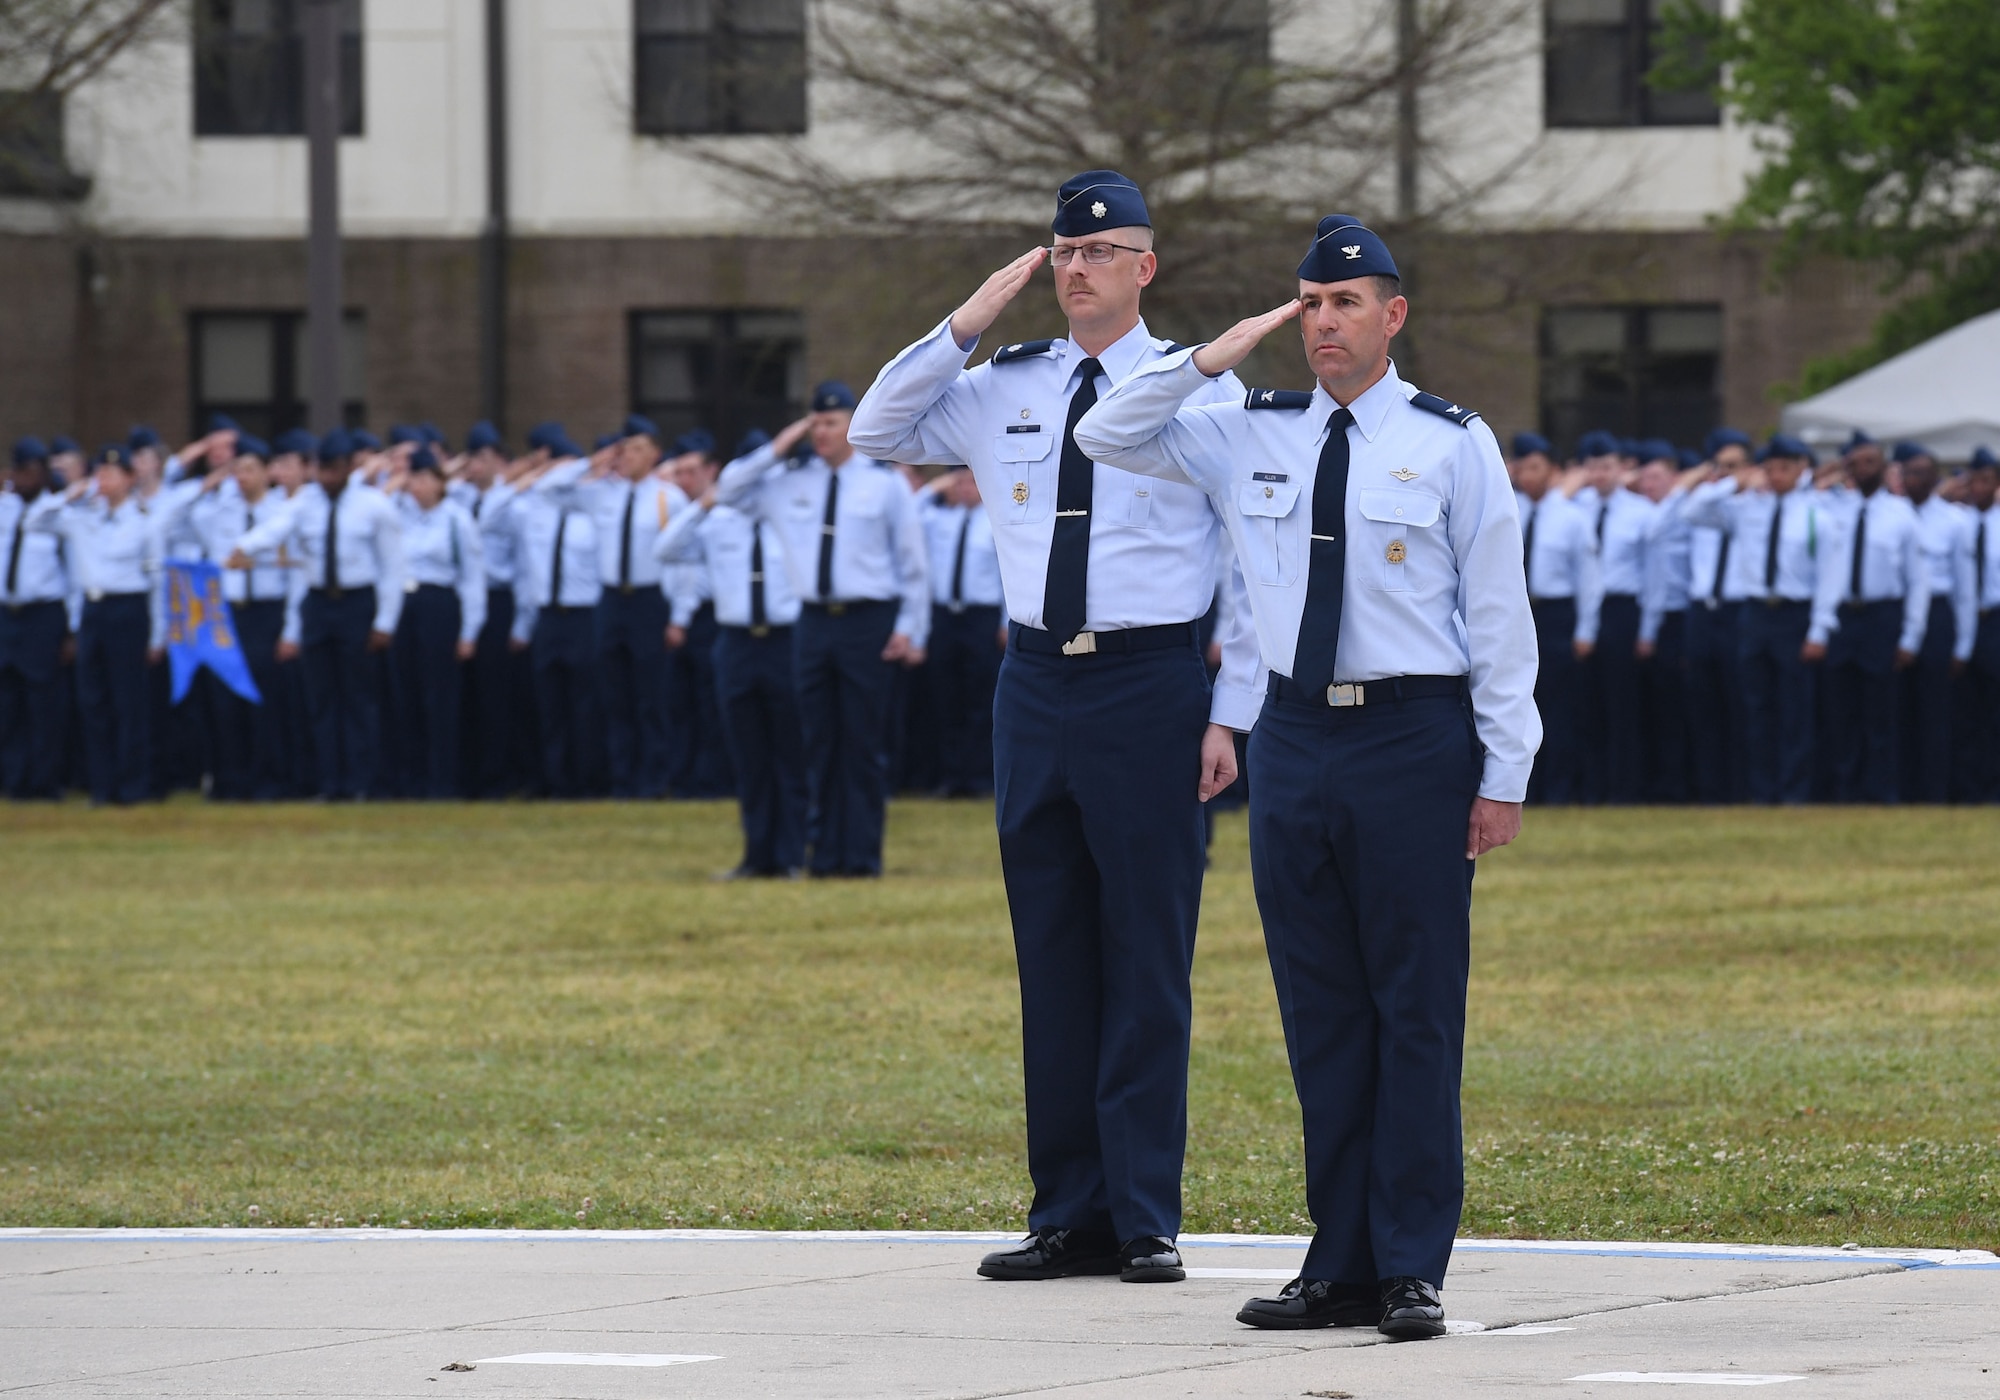 U.S. Air Force Lt. Col. Nicholas Kuc, 333rd Training Squadron commander, and Col. Jason Allen, 81st Training Wing vice commander, render salutes during the 81st TRW assumption of command ceremony on the Levitow Training Support Facility drill pad at Keesler Air Force Base, Mississippi, March 23, 2023.